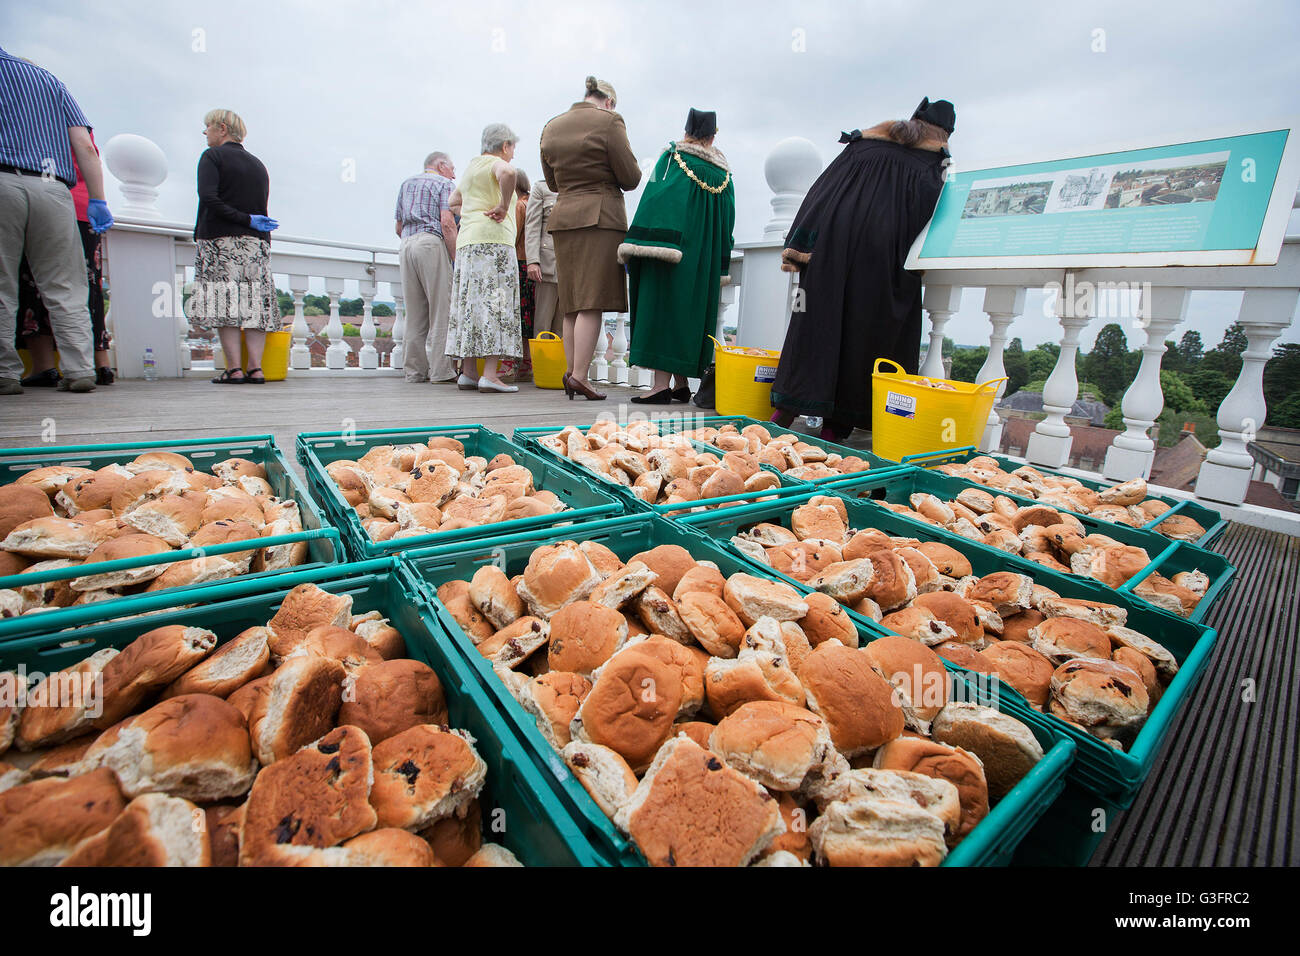 Abingdon Oxfordshire, UK, 11th June 2016. Town leaders throw buns from the roof of the County Hall Museum to throw 4,500 buns to the crowd gathered below to celebrate the Queen's 90th birthday. Credit:  Damian Halliwell/Alamy Live News Stock Photo